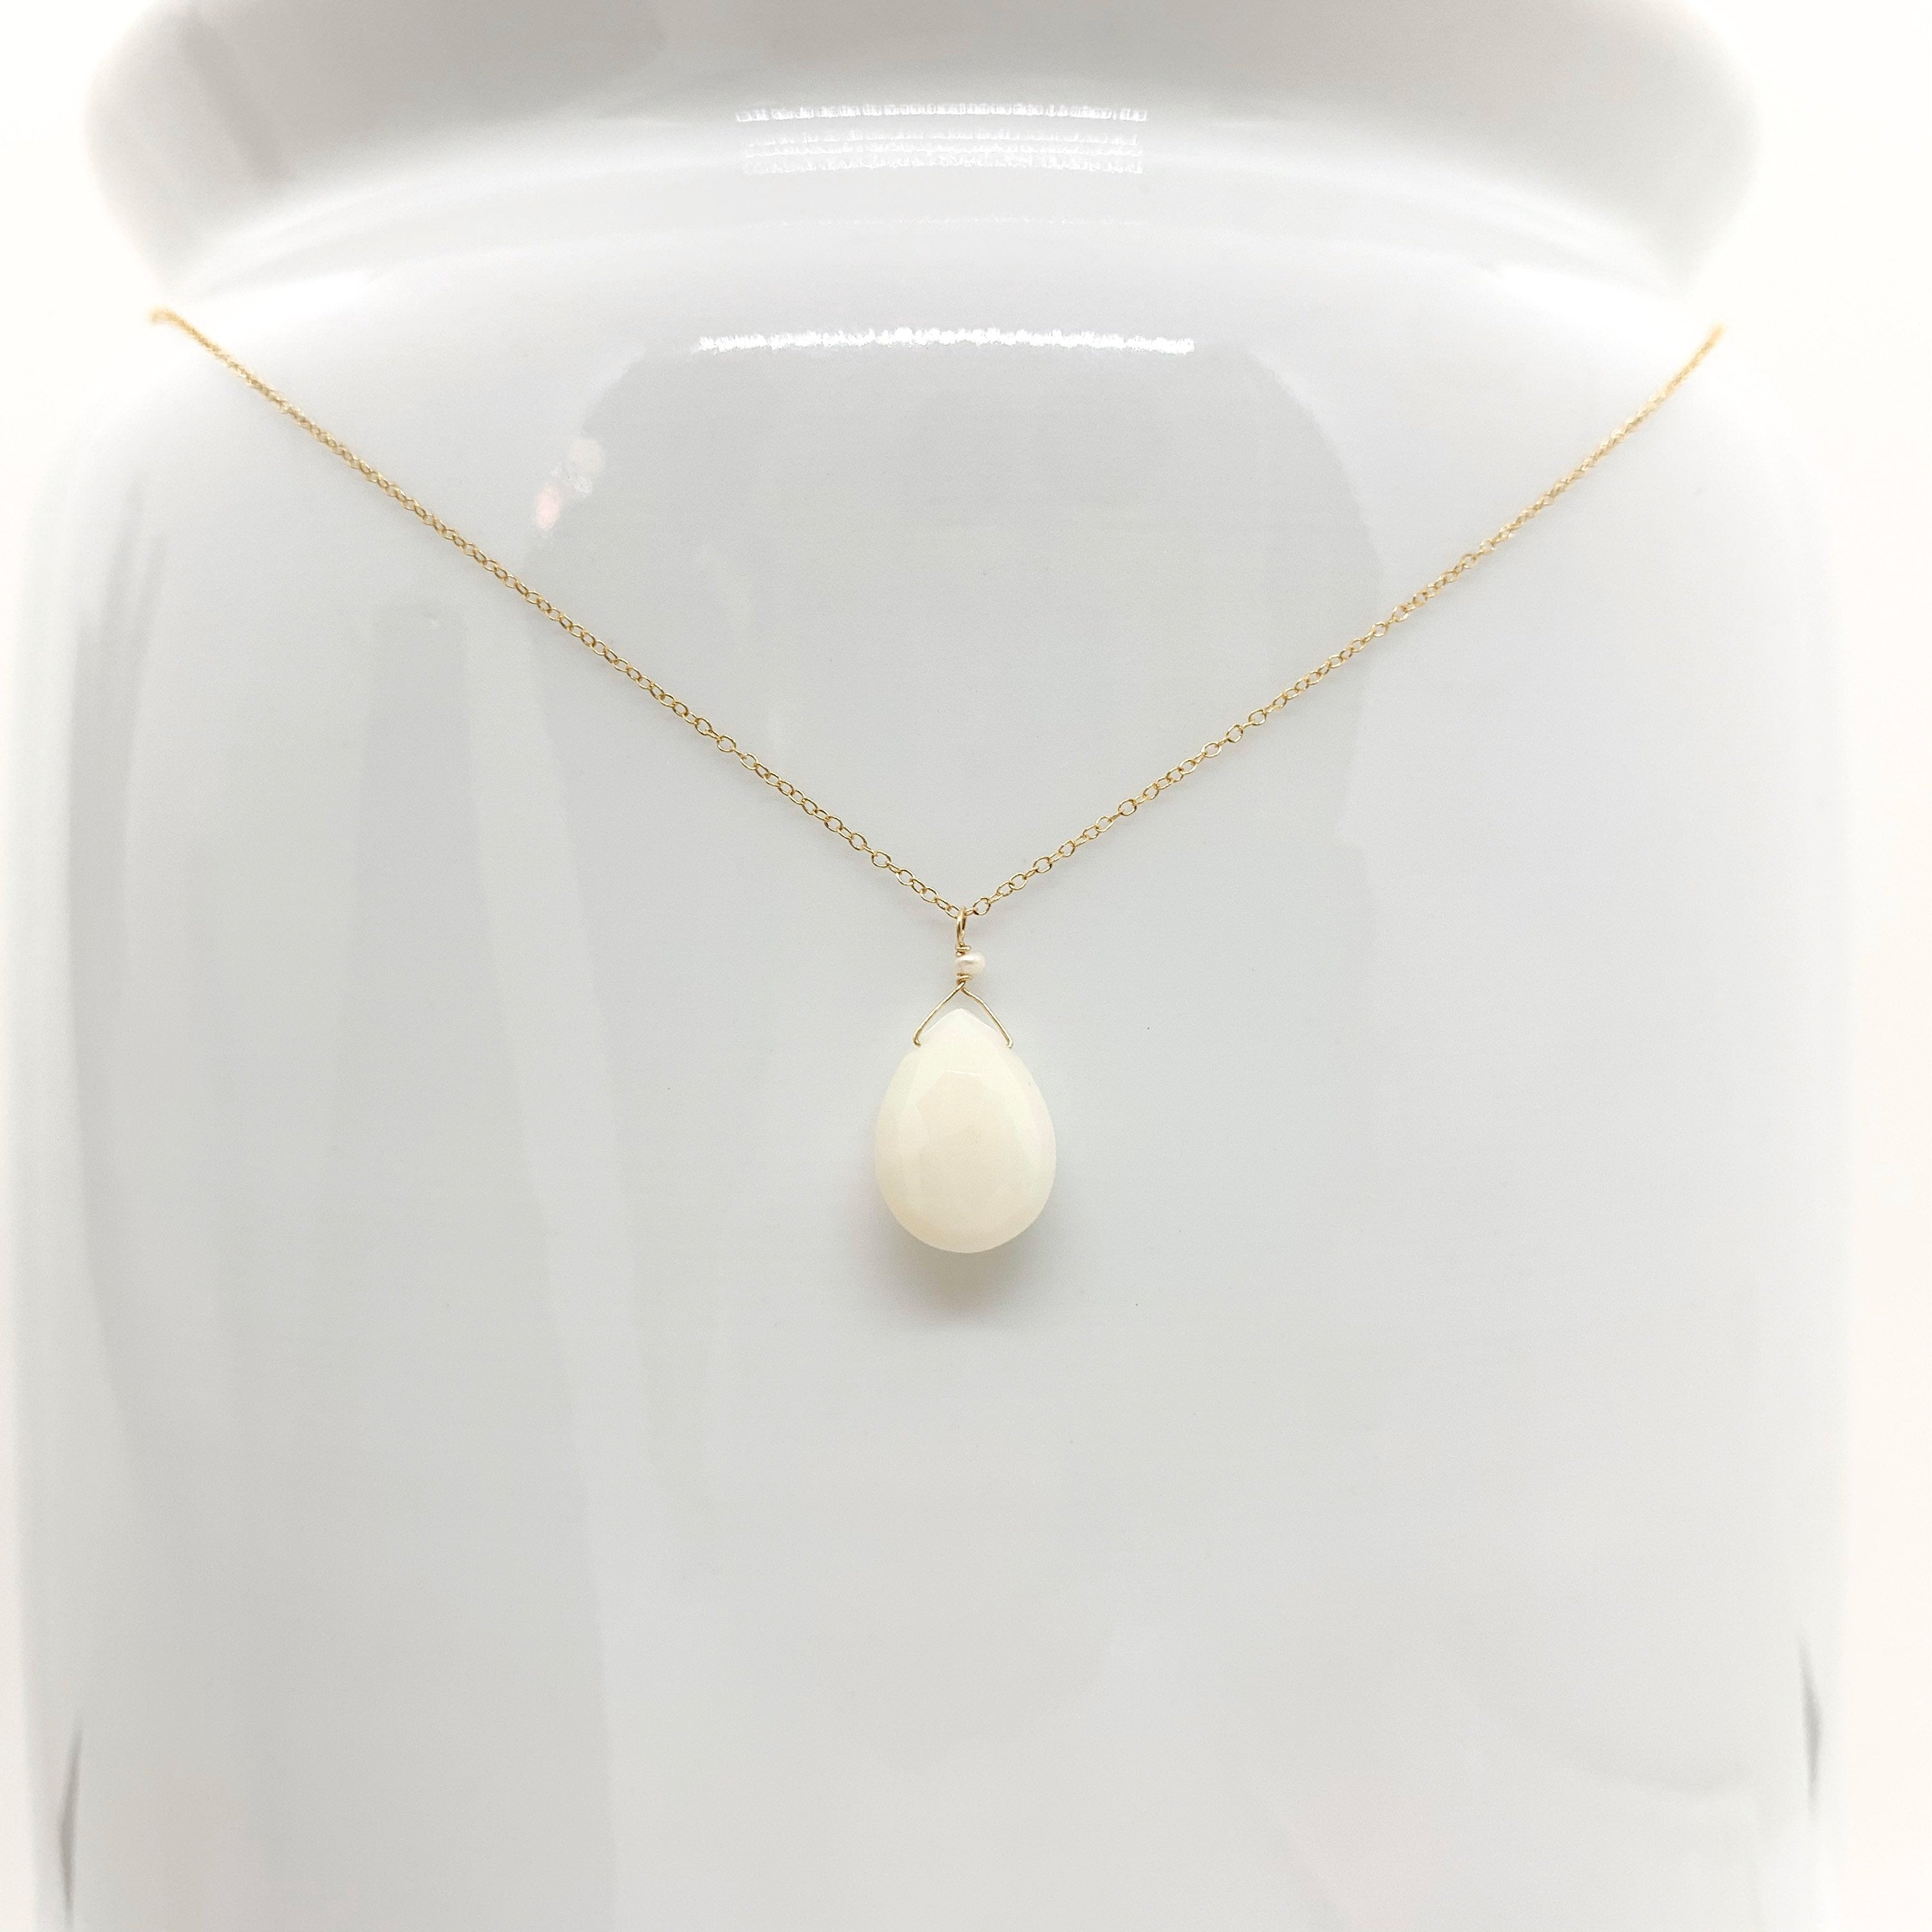 14k Gold Chain Necklace w/ White Opal